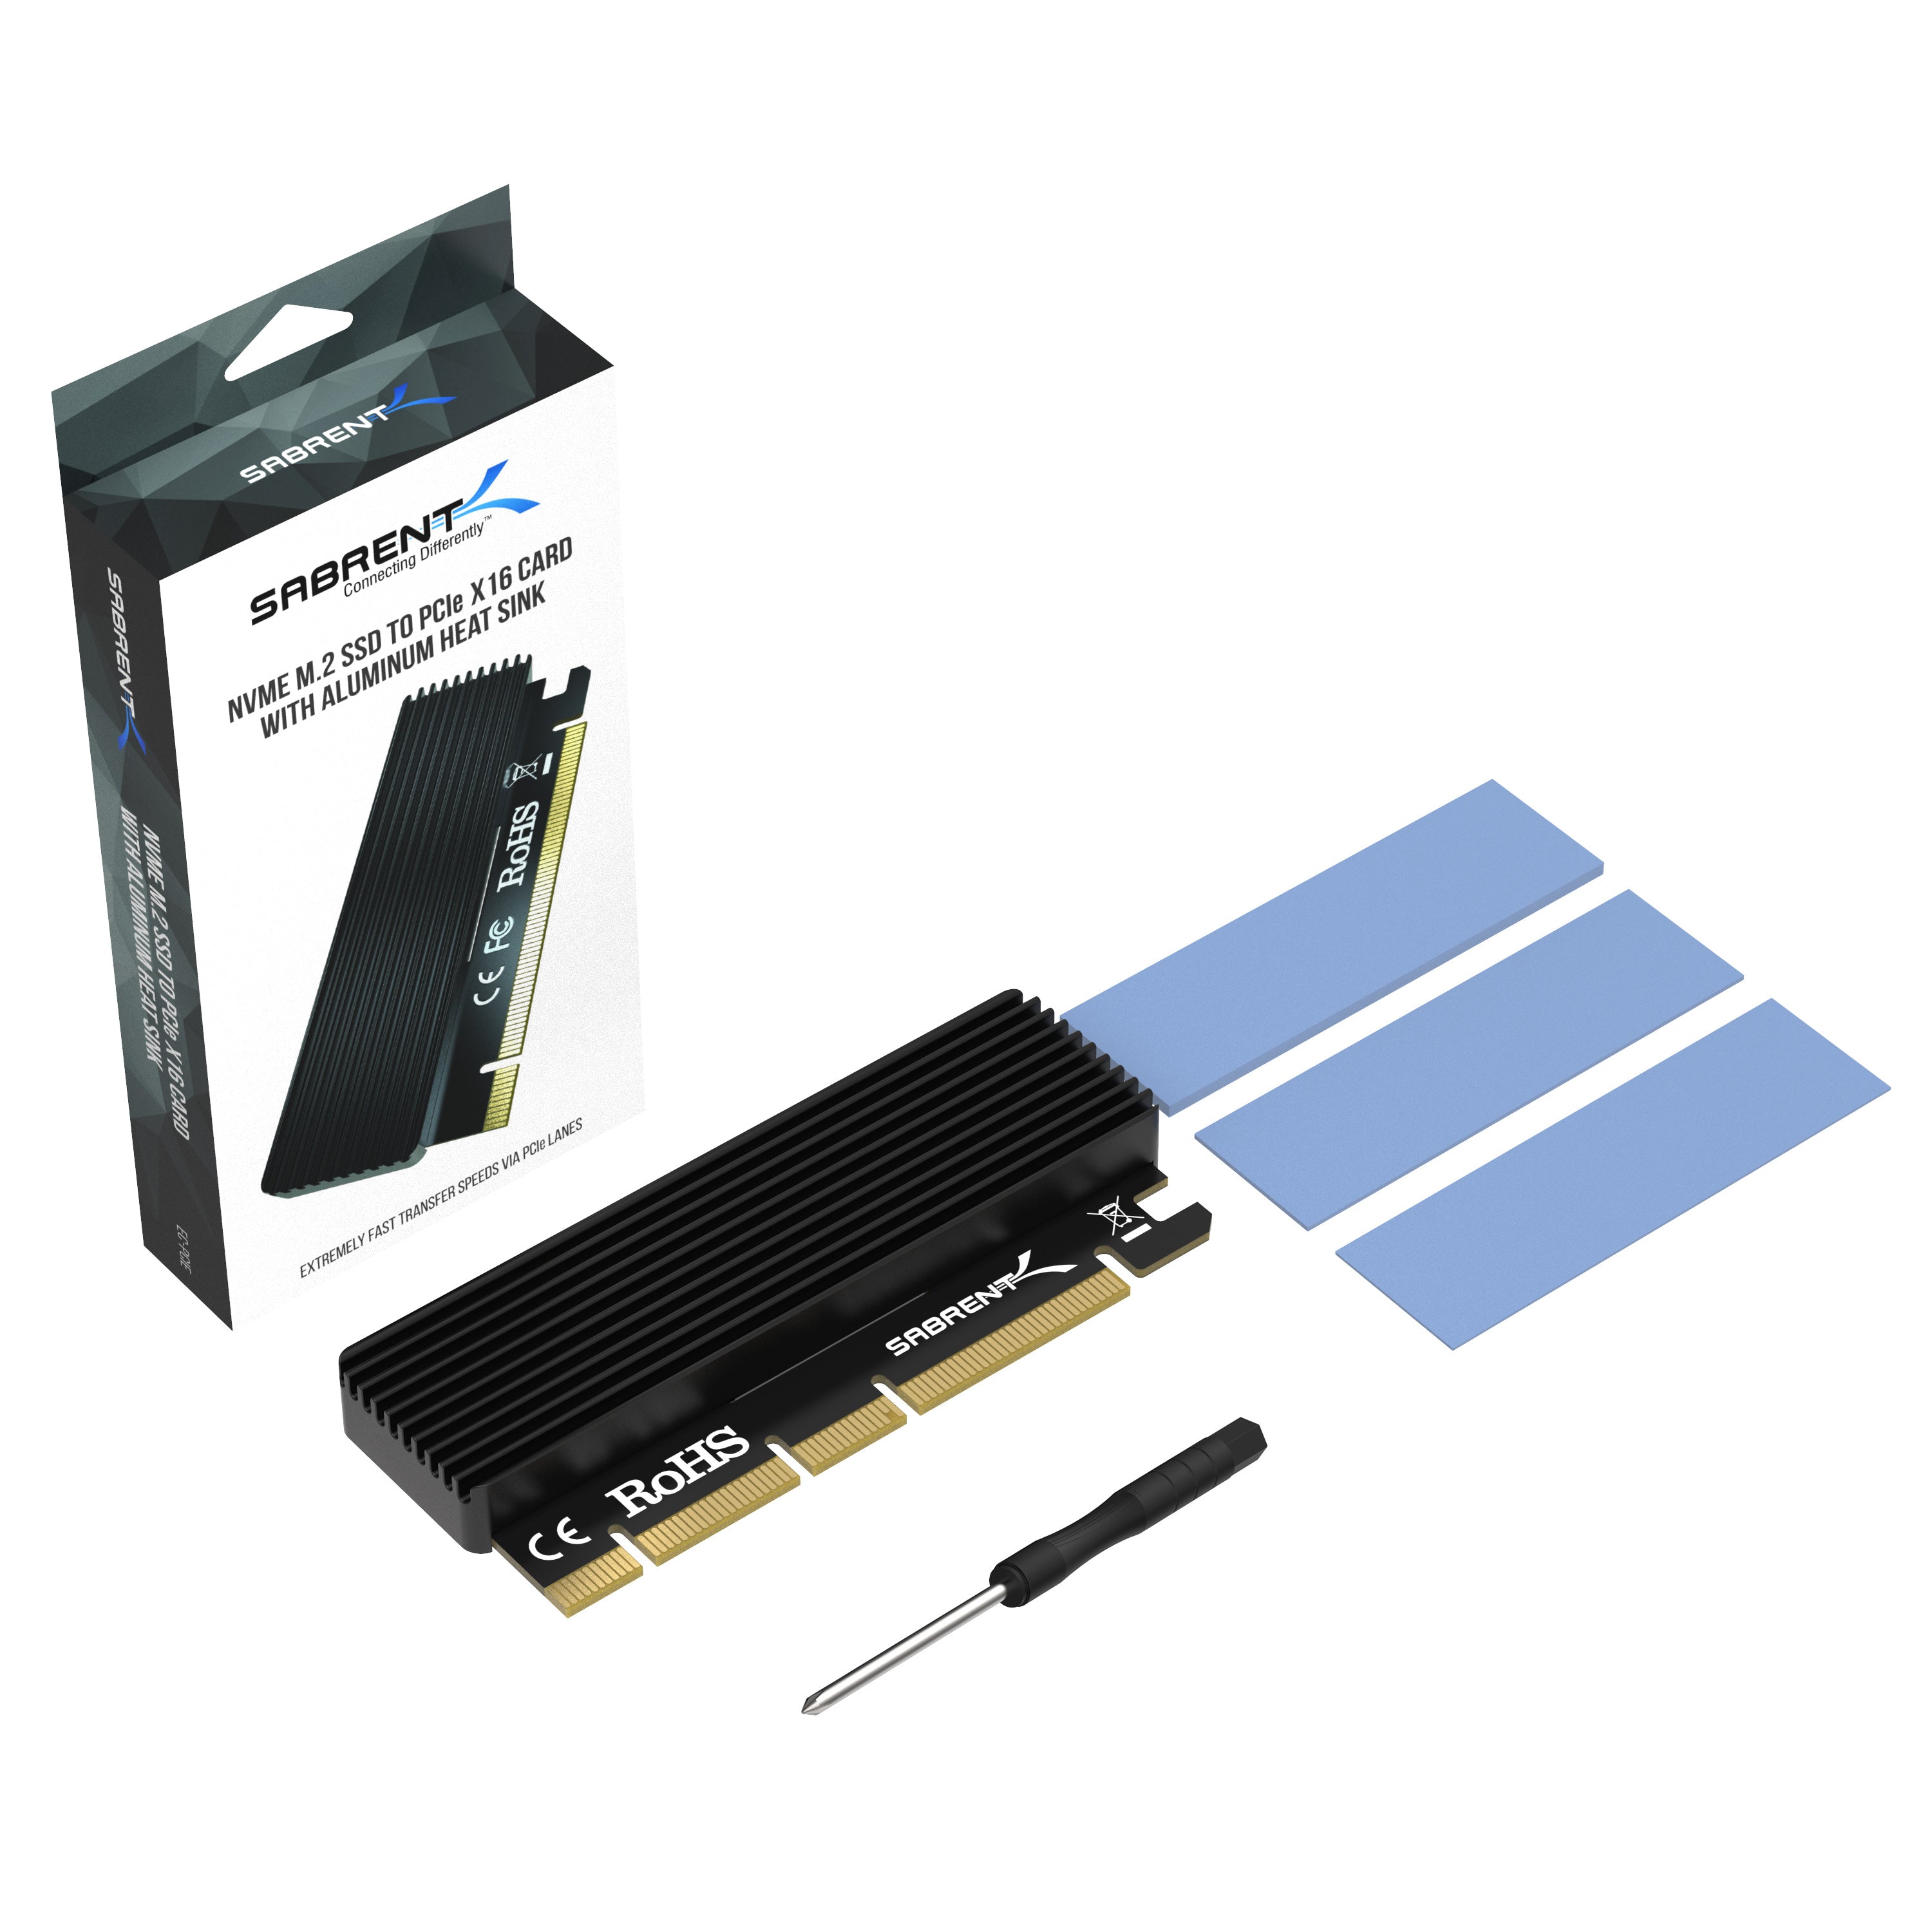 M.2 NVMe SSD PCIe 4.0 Adapter with Covered Heat Sink